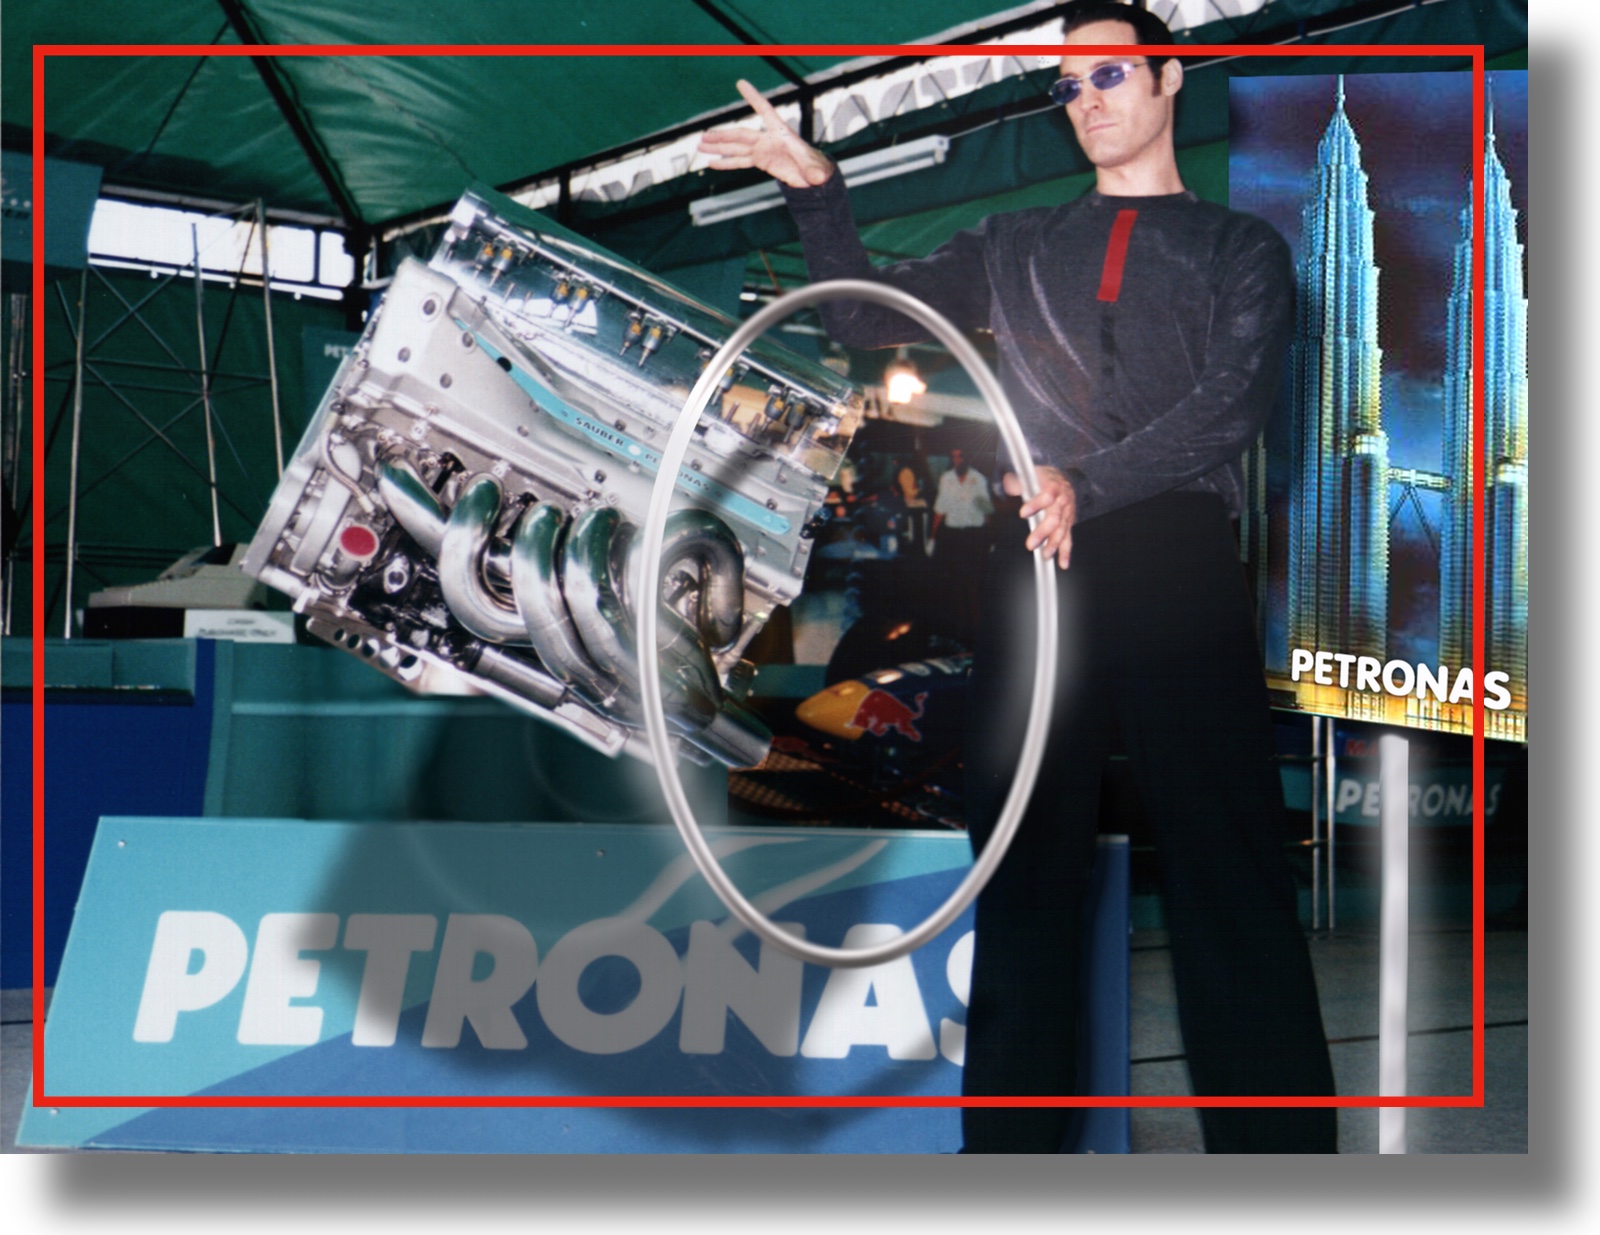 Petronas Clean Comedy Magician Corporate Comedy Magician For Company Parties and Trade Shows in Atlanta